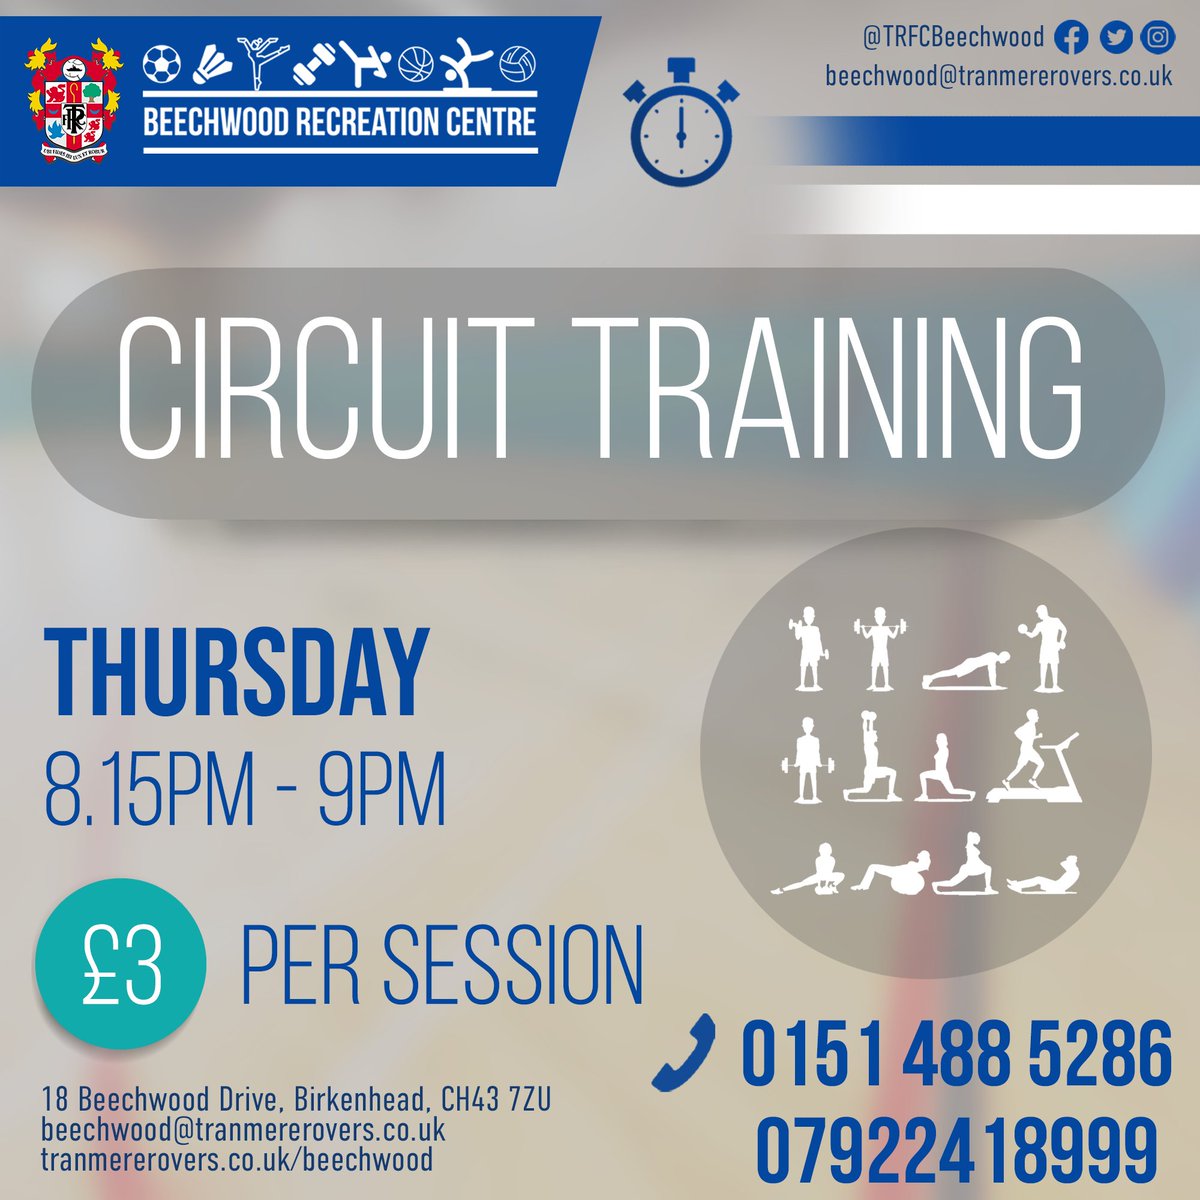 💪 Come along to our Circuit Training session at Beechwood this evening and every Thursday from 8.15pm-9pm, just £3 per session. 📞 Get in touch via either of the phone numbers below for more details👇 #TRFC #SWA